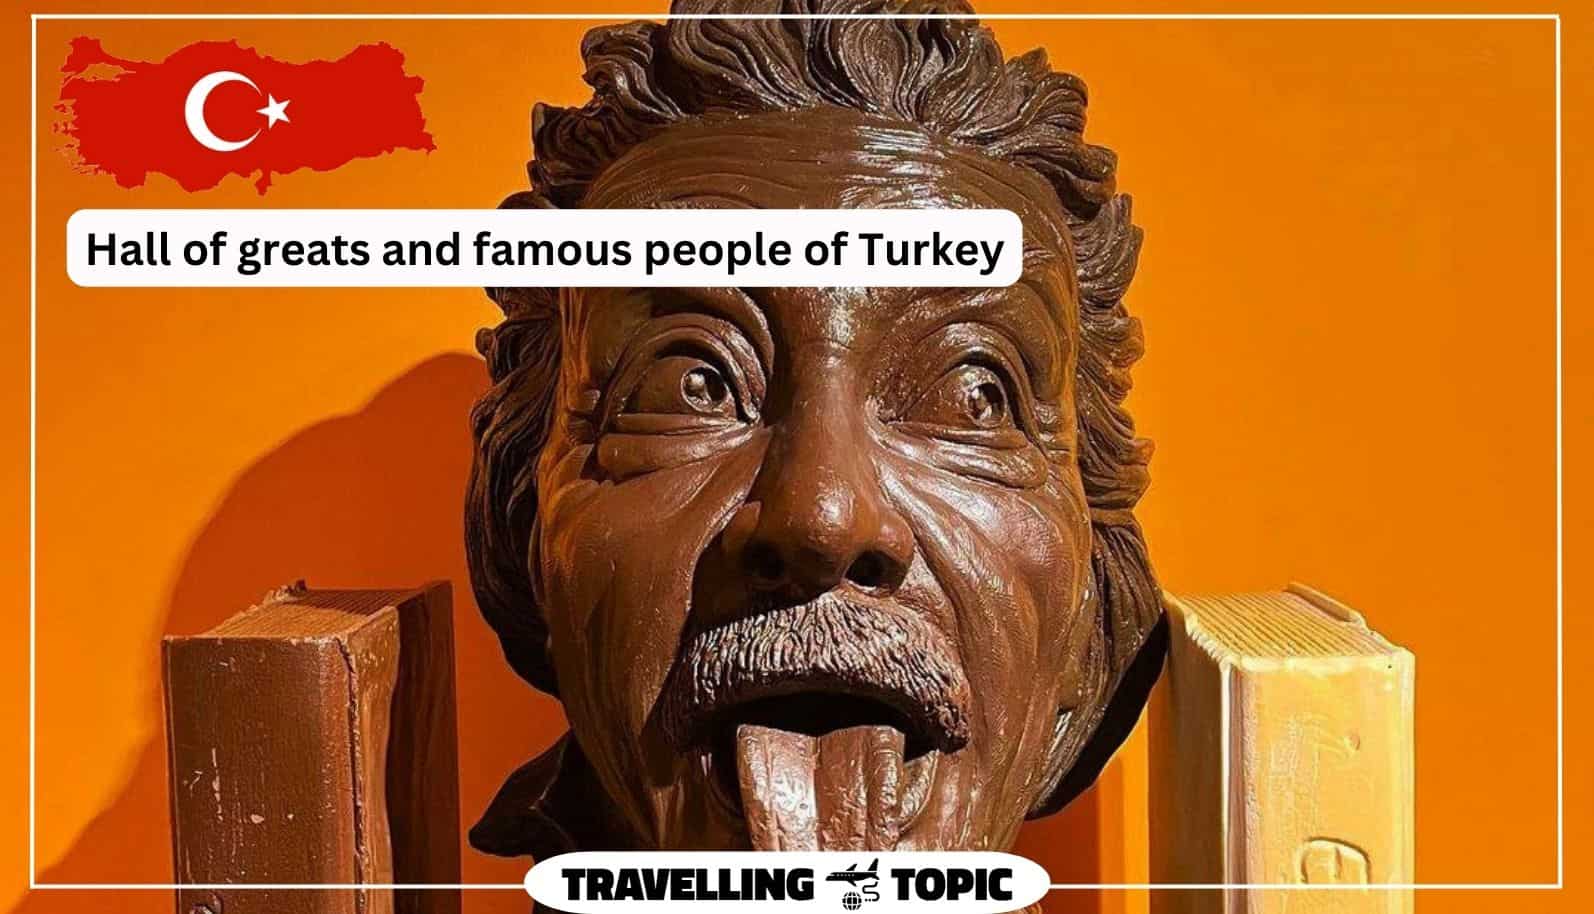 Hall of greats and famous people of Turkey